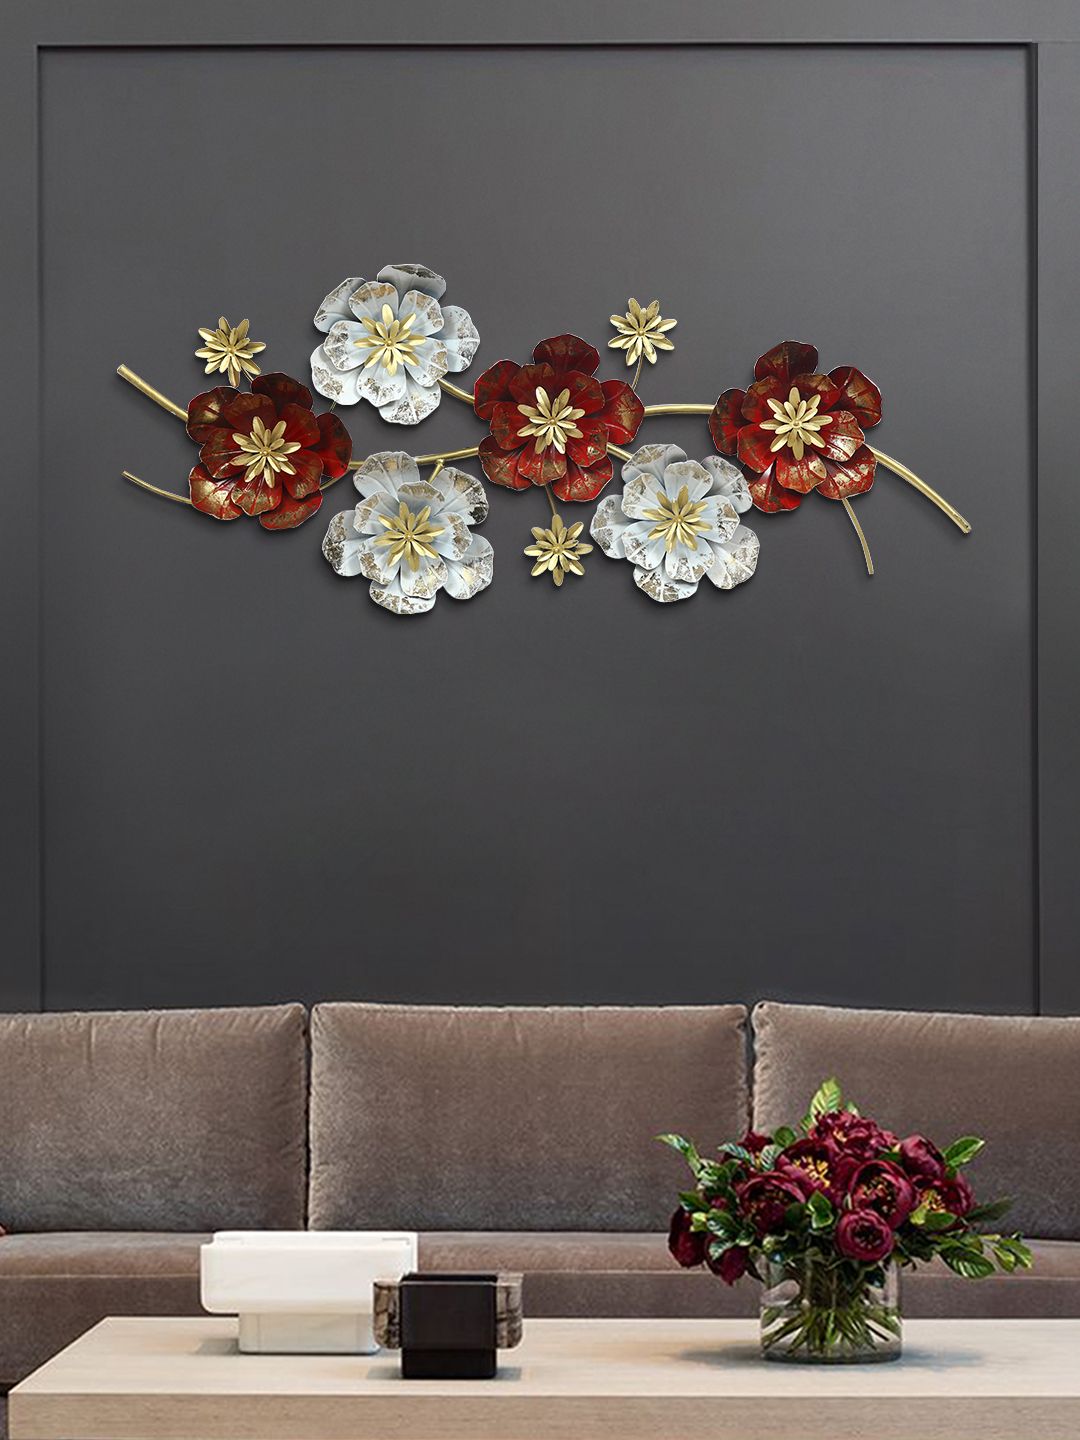 Aapno Rajasthan Red & Gold-Toned Flower Wall Decor Price in India